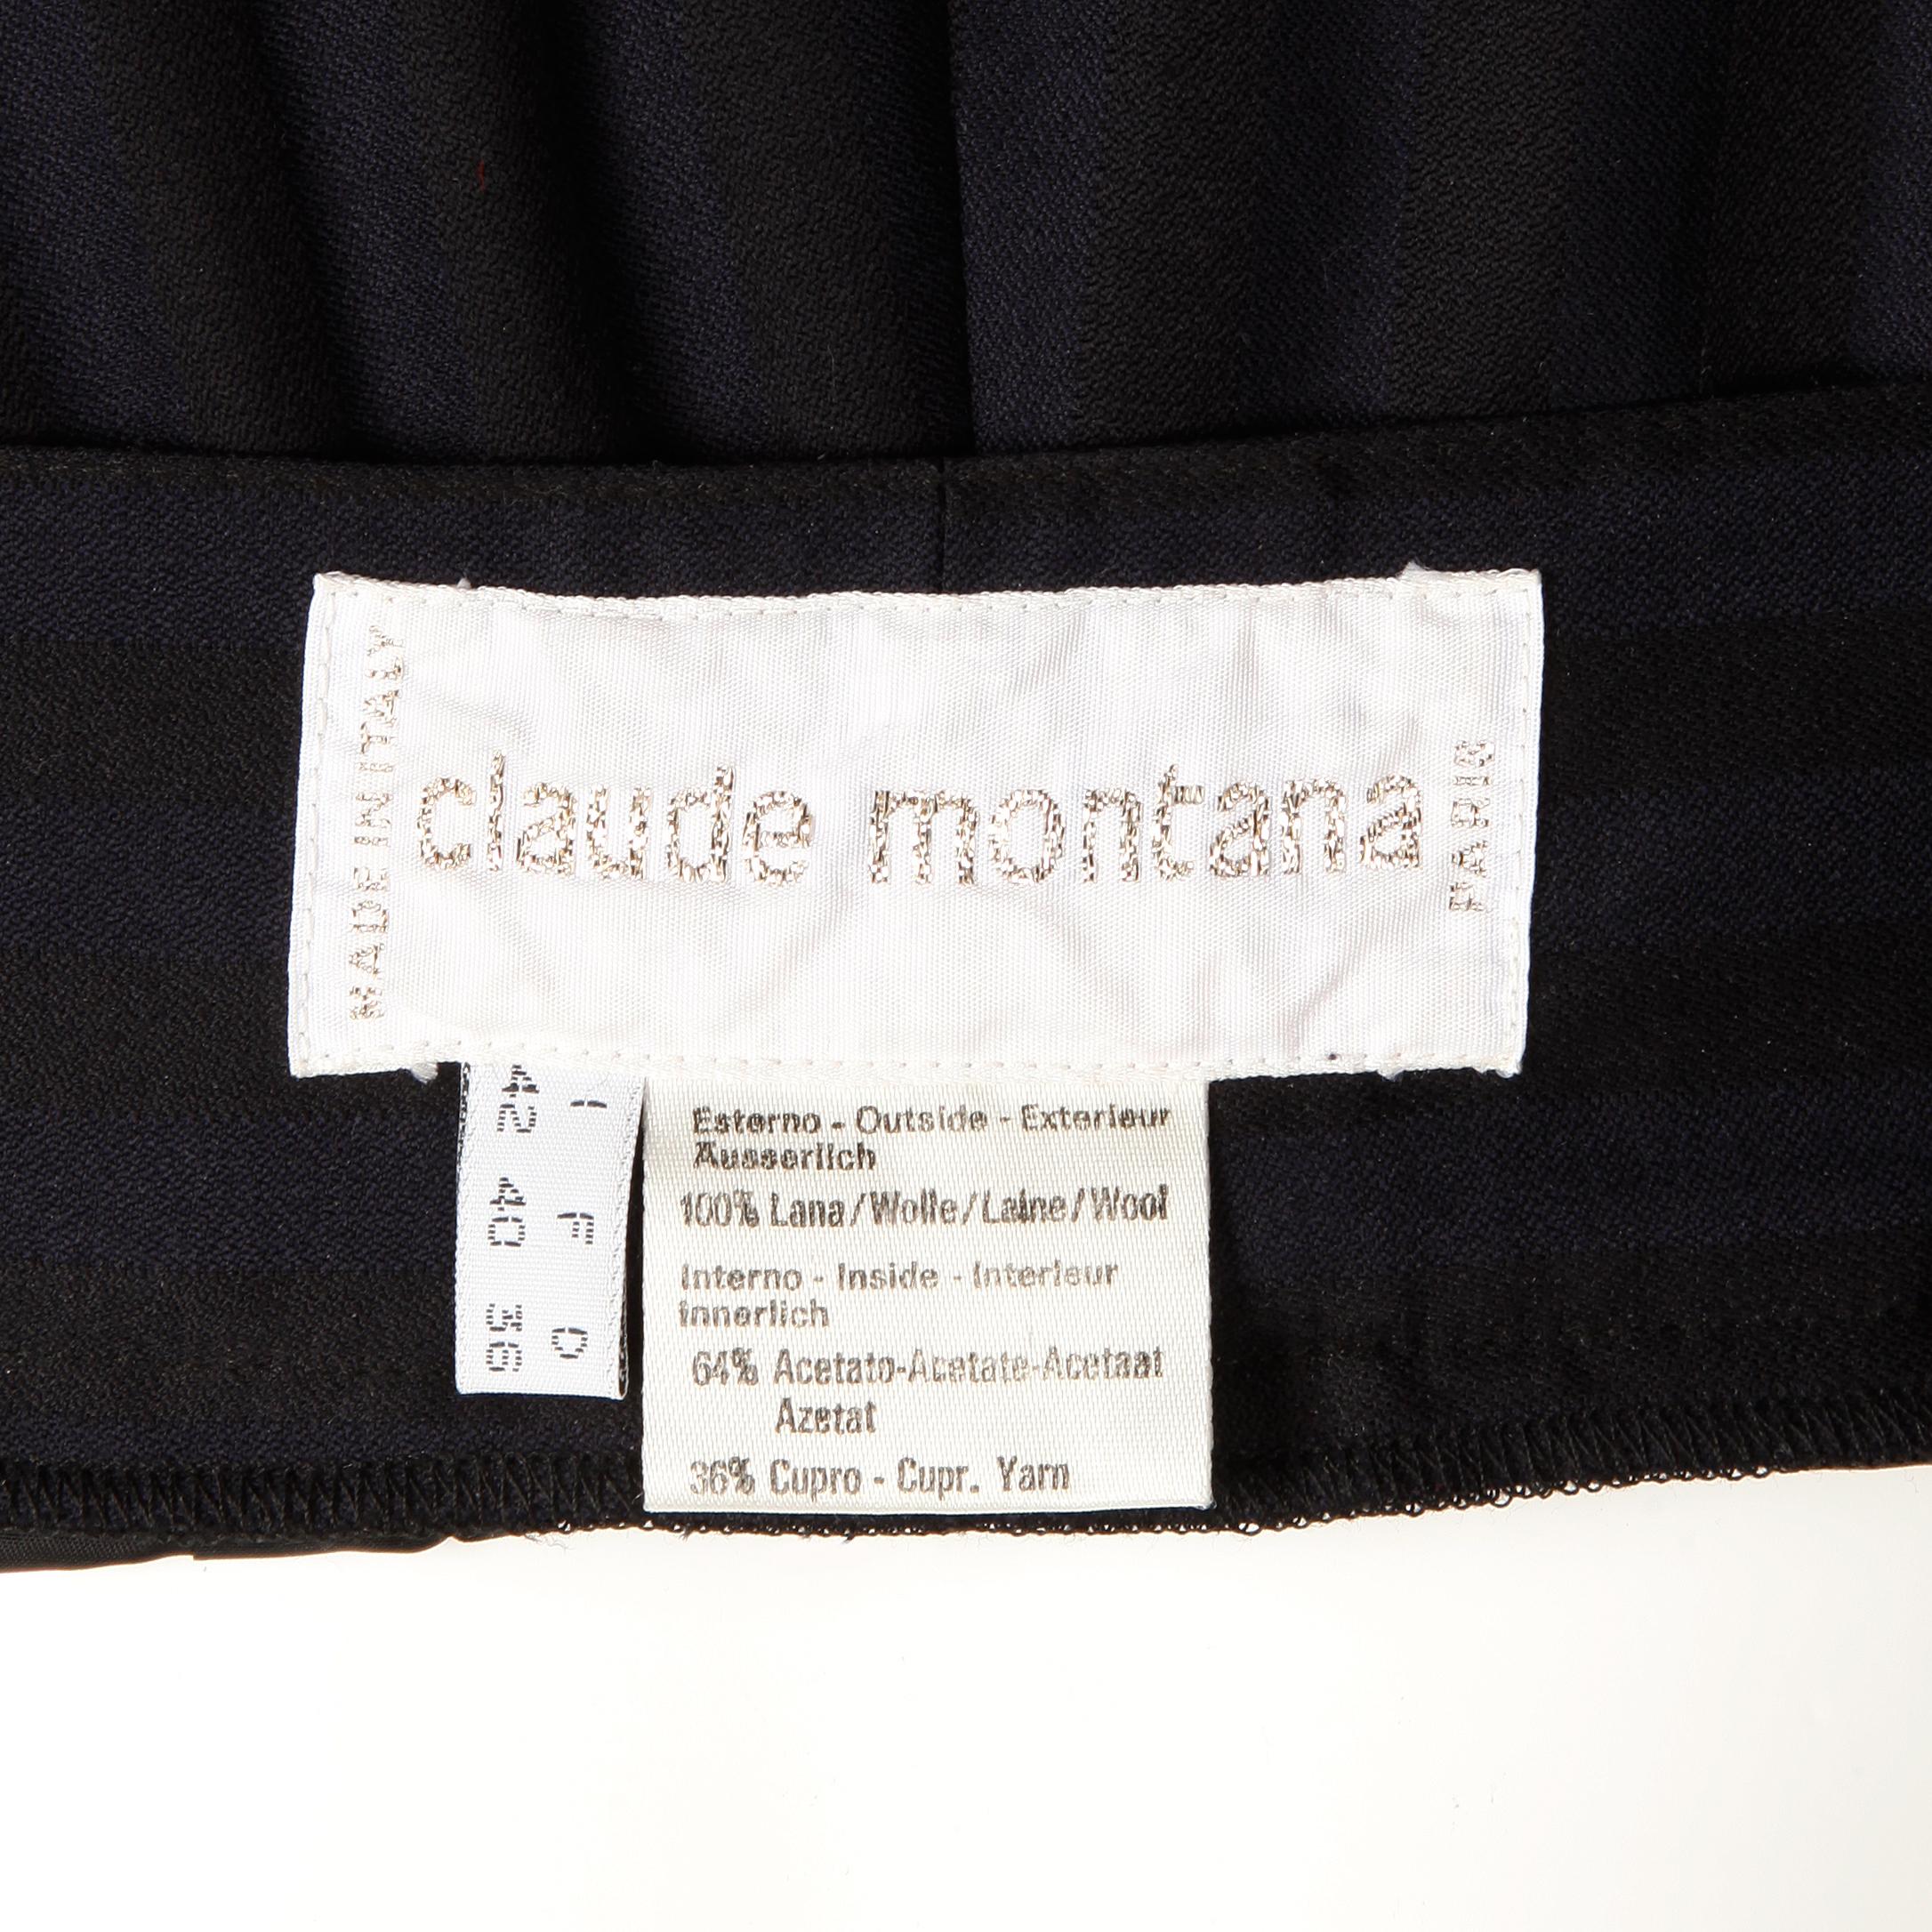 Vintage 1980s black and navy blue striped wool pants or trousers by Claude Montana. Fully lined with front button and zipper closure. 100% wool with 64% acetate, 36% cupro. The marked size is I-42, F-40, D-36, GB-34, BS-38, USA-8. Hidden side